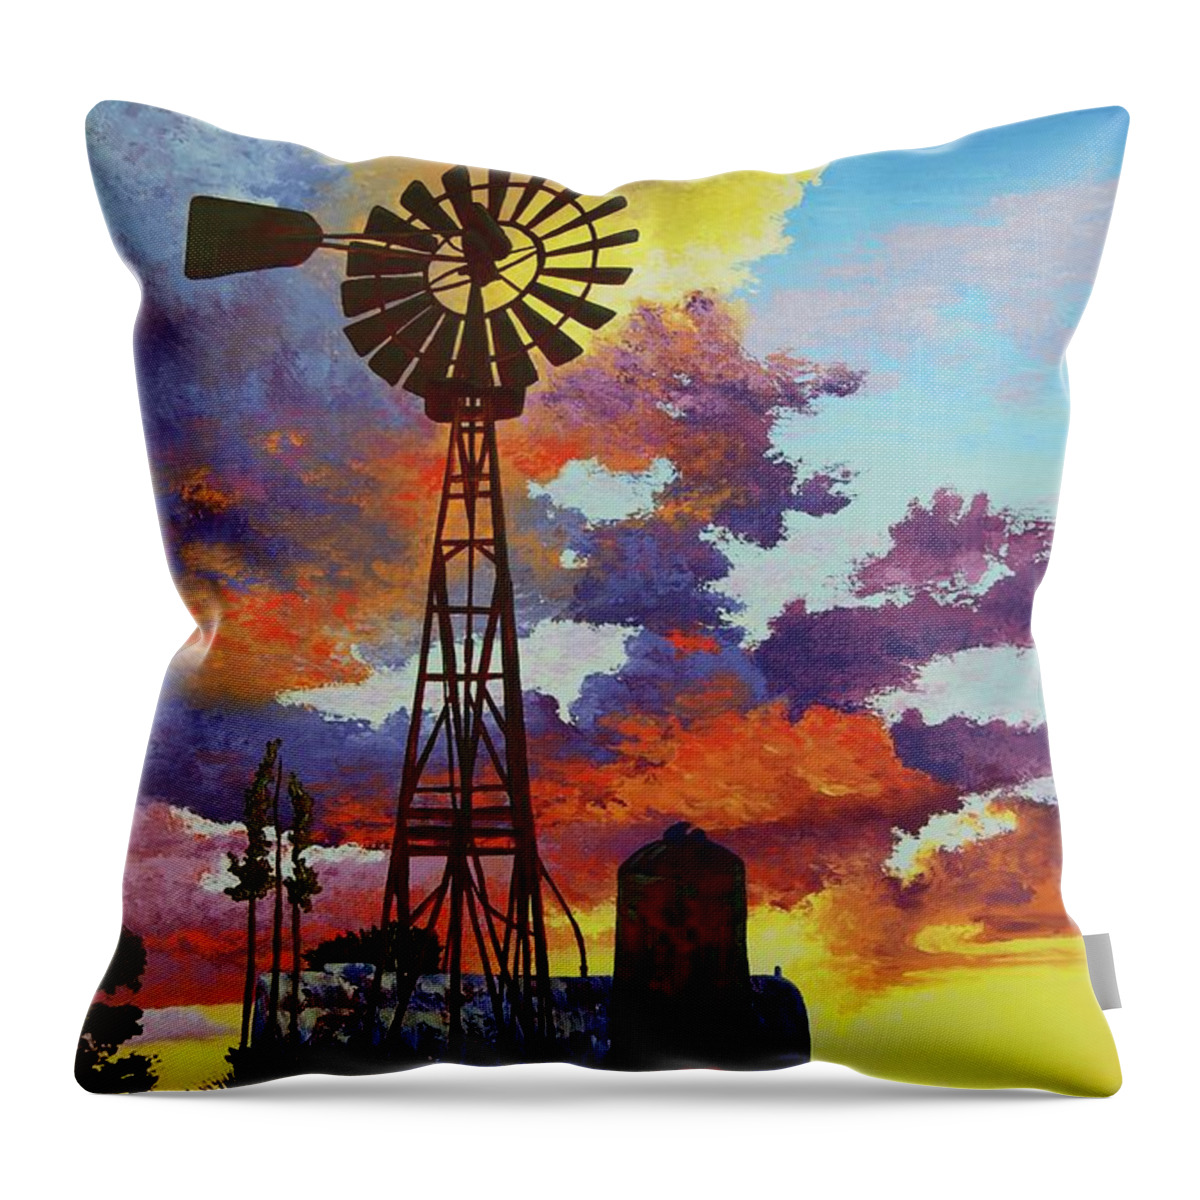 Landscape Throw Pillow featuring the painting God's Gifts by Cheryl Fecht